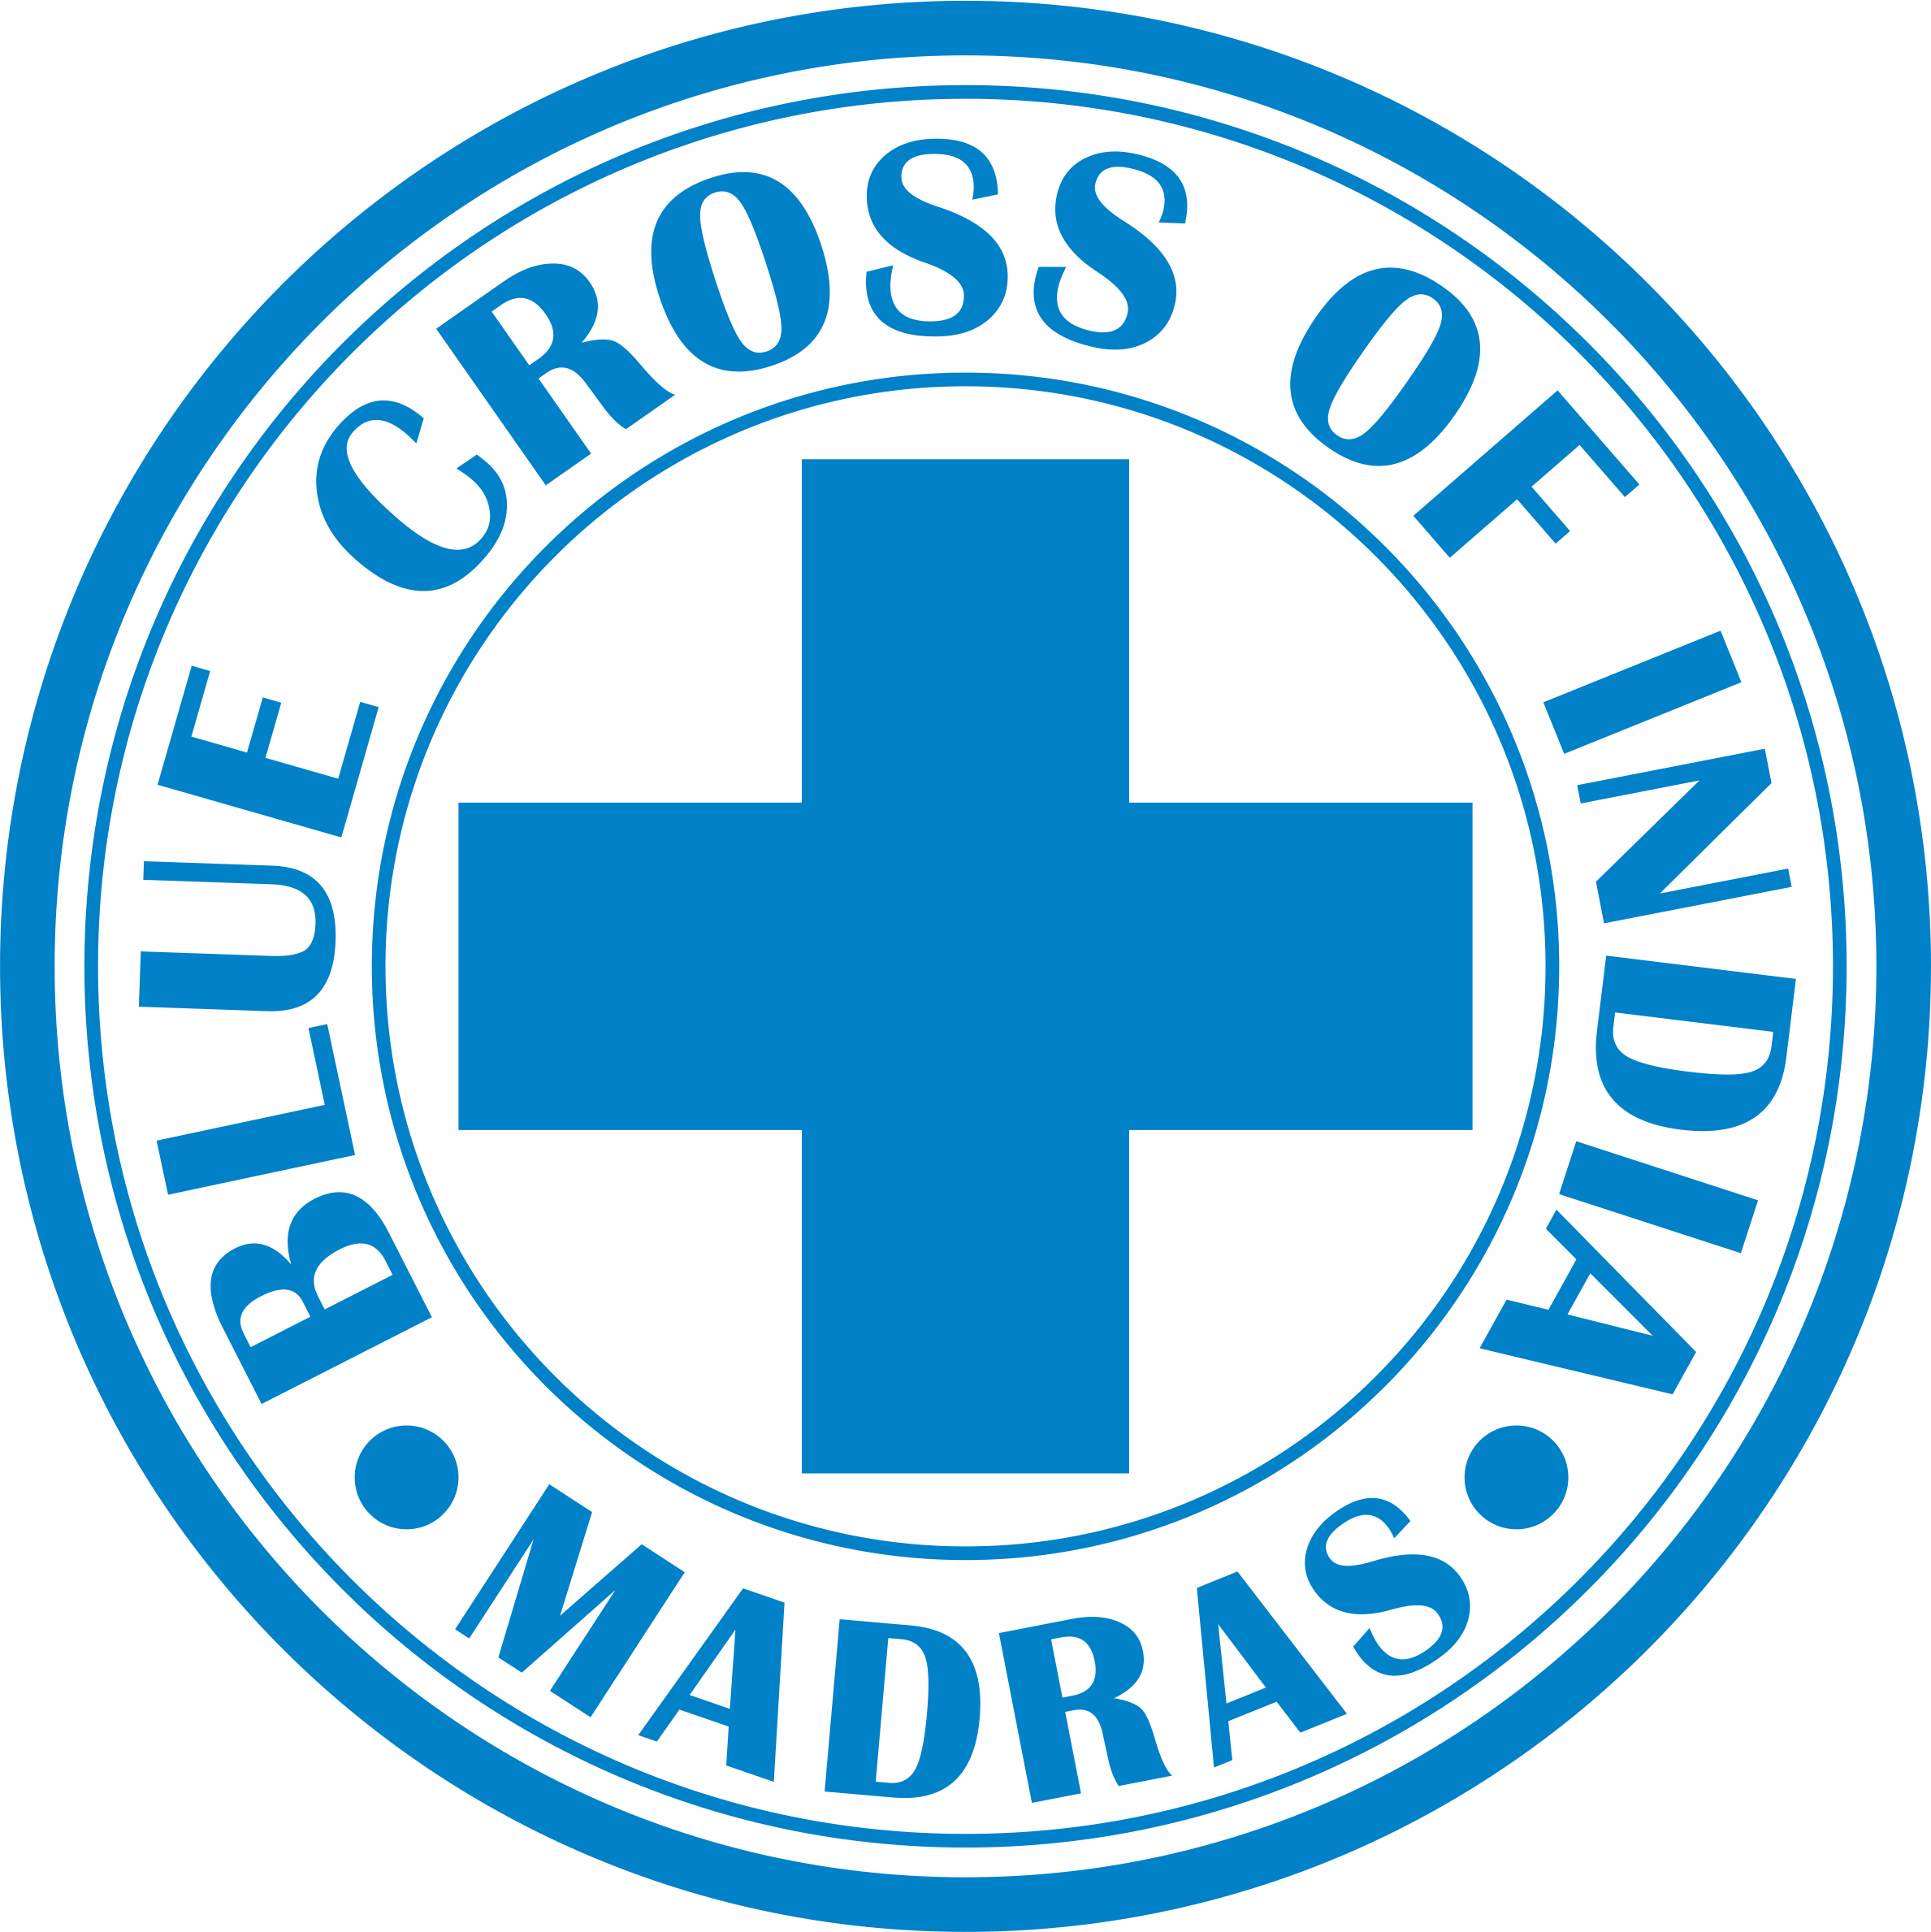 BLUE CROSS OF INDIA Reviews, Employer Reviews, Careers, Recruitment ...